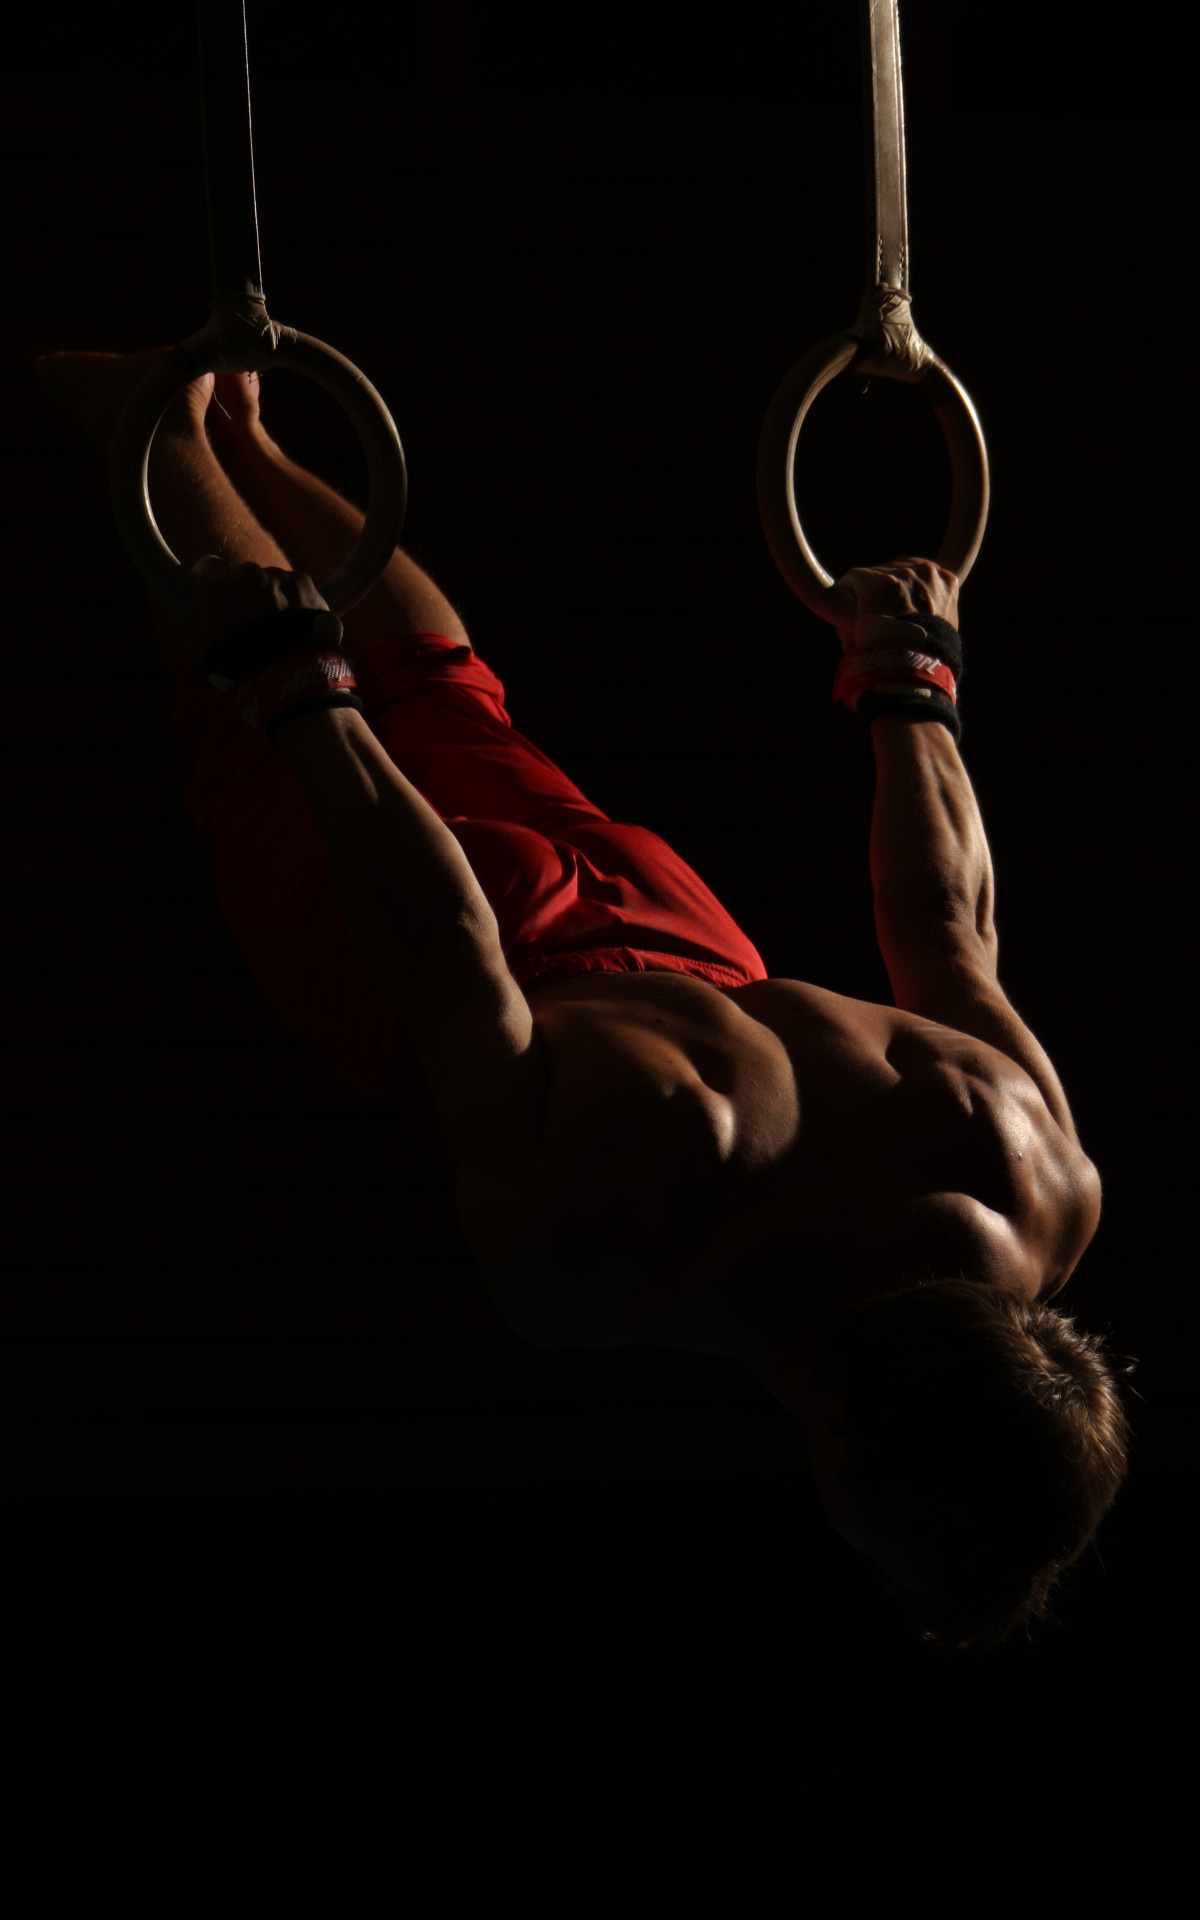 Rings (Gymnastics): Strength and hold elements, Full body suspension, Strength training. 1200x1920 HD Wallpaper.